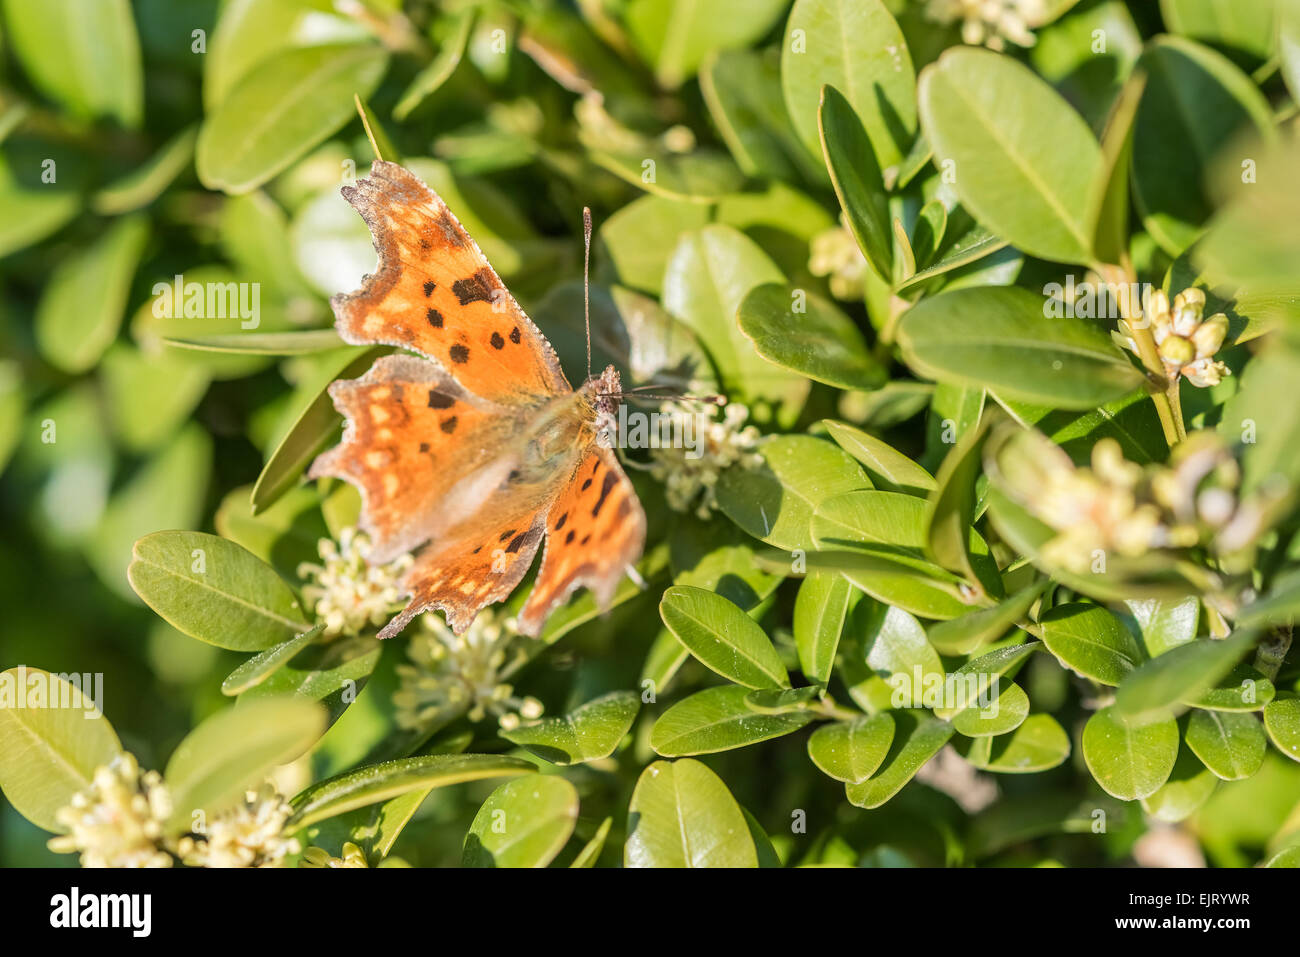 Orange Butterfly Monarch With Brown Spots Close Up Macro Stock Photo